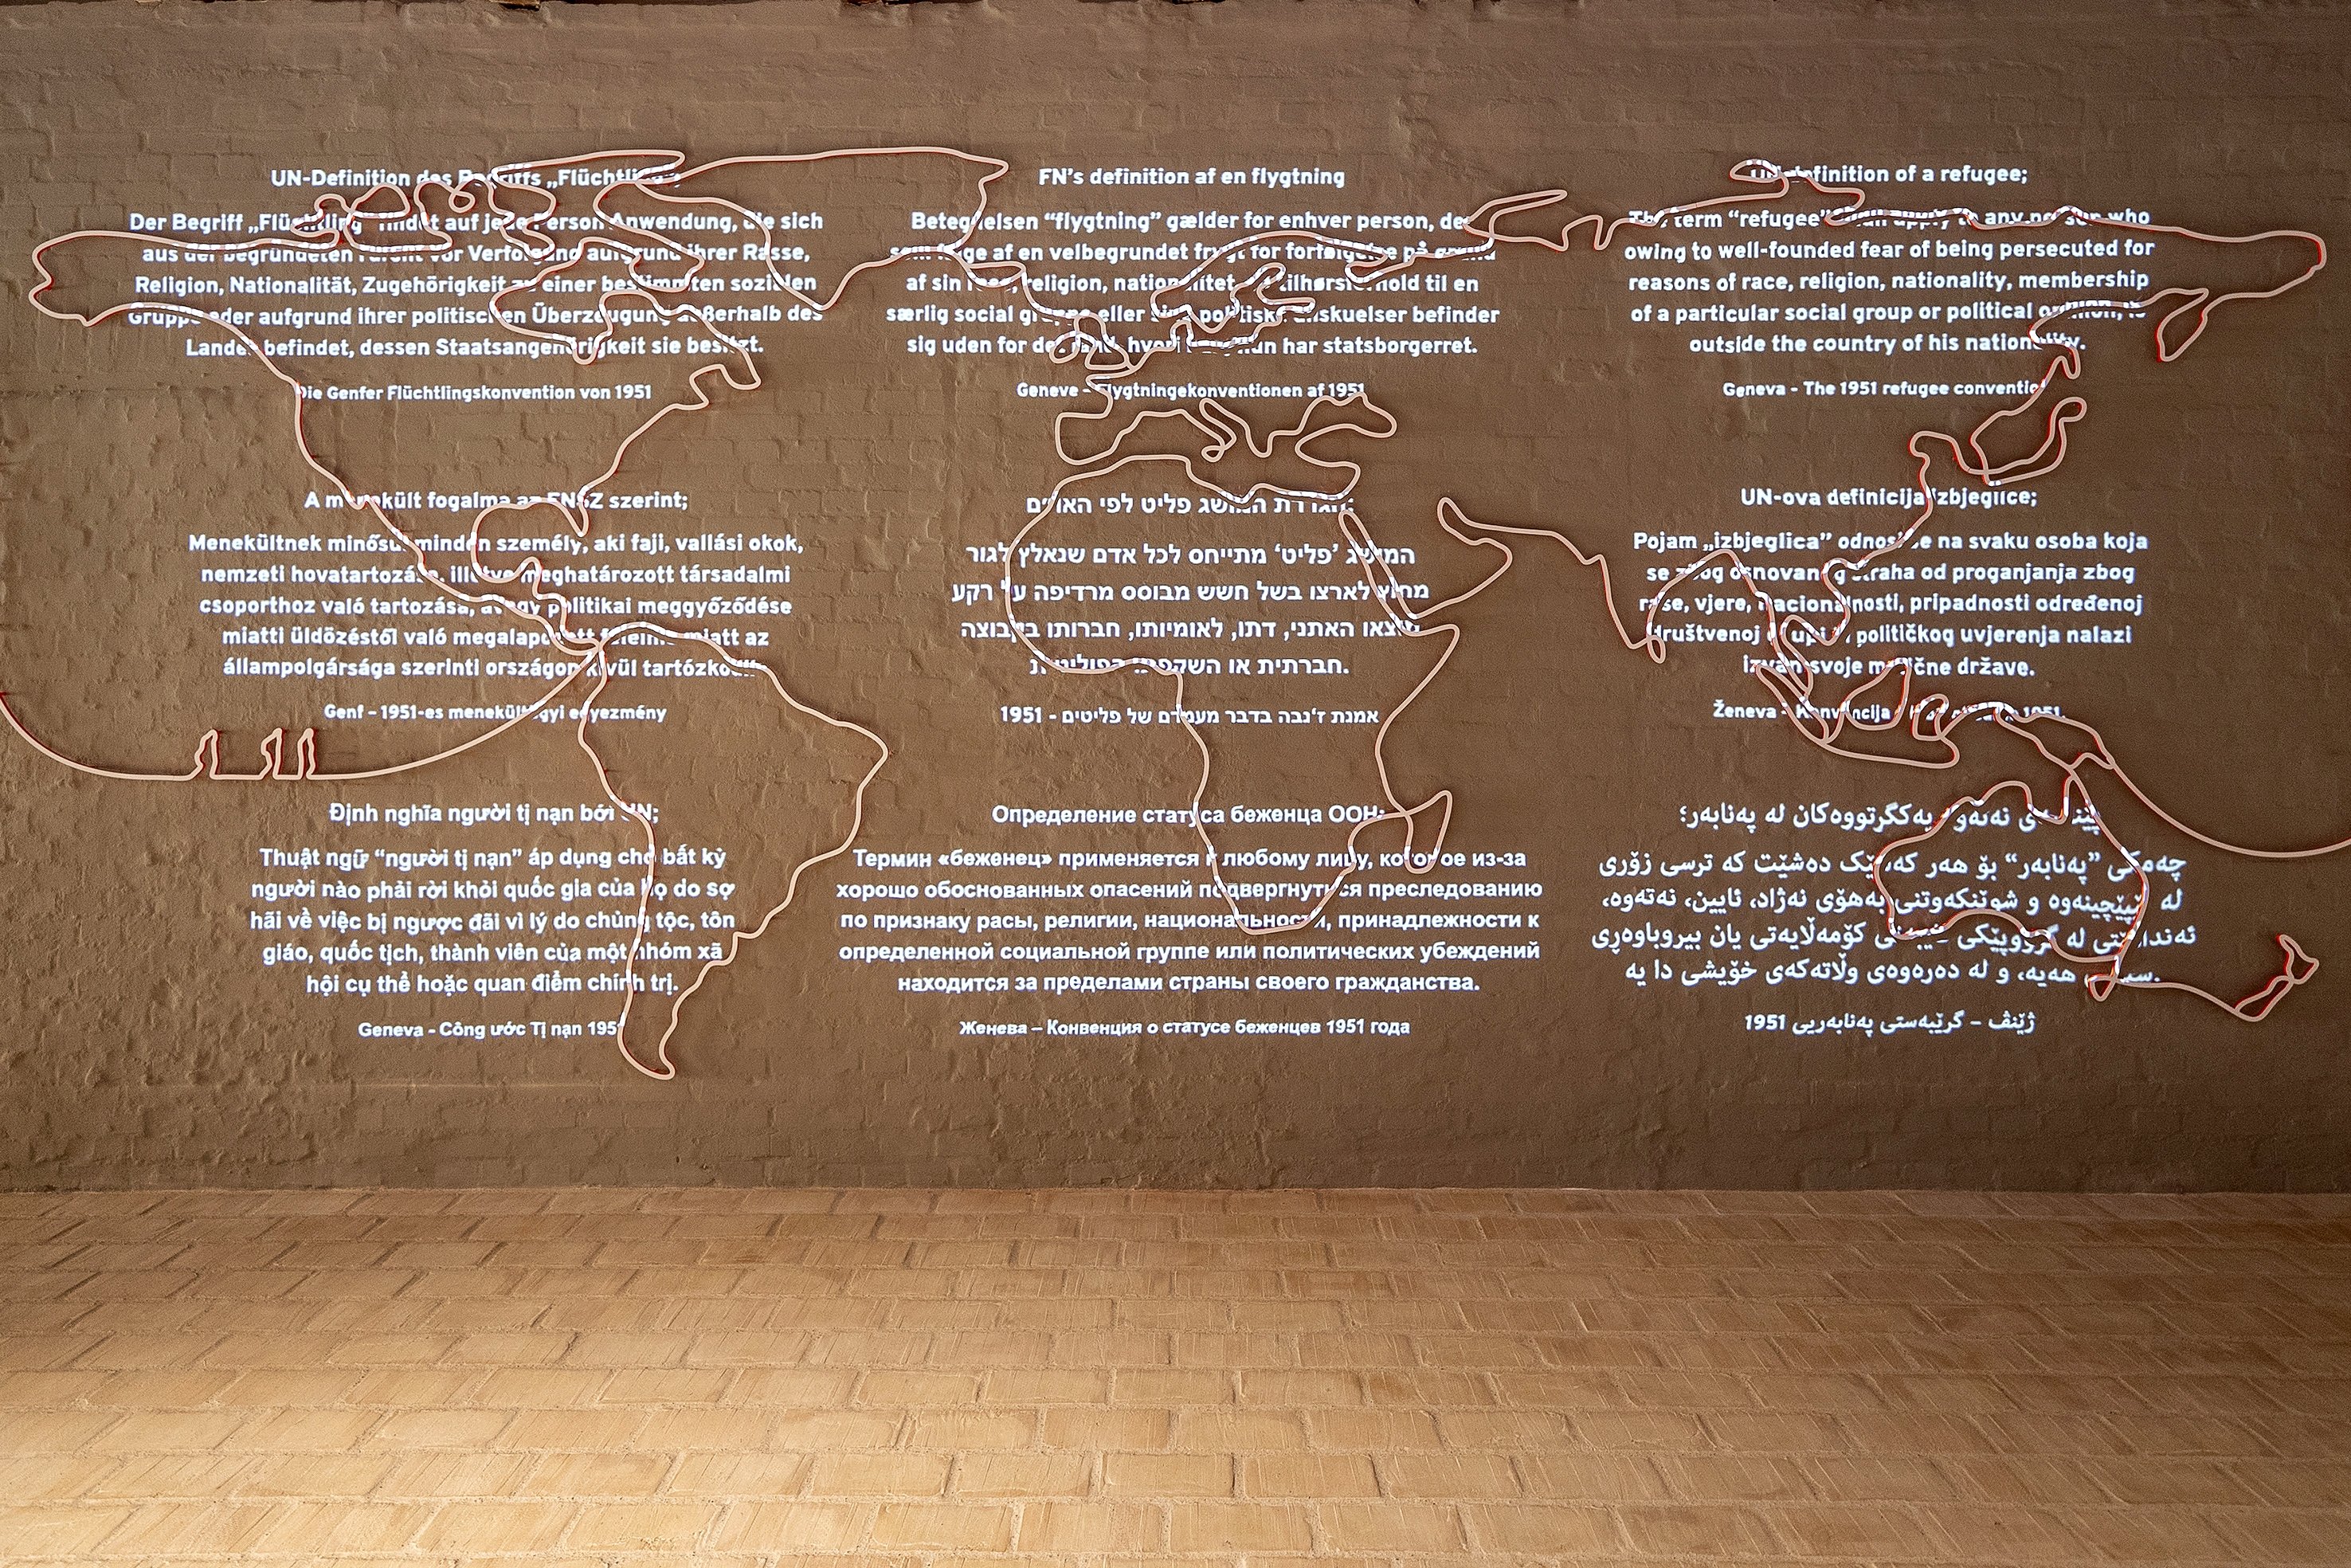 Information on a wall, in Flugt, a new museum for refugee stories, in Oksboel, Denmark, June 24, 2022. (AP Photo)